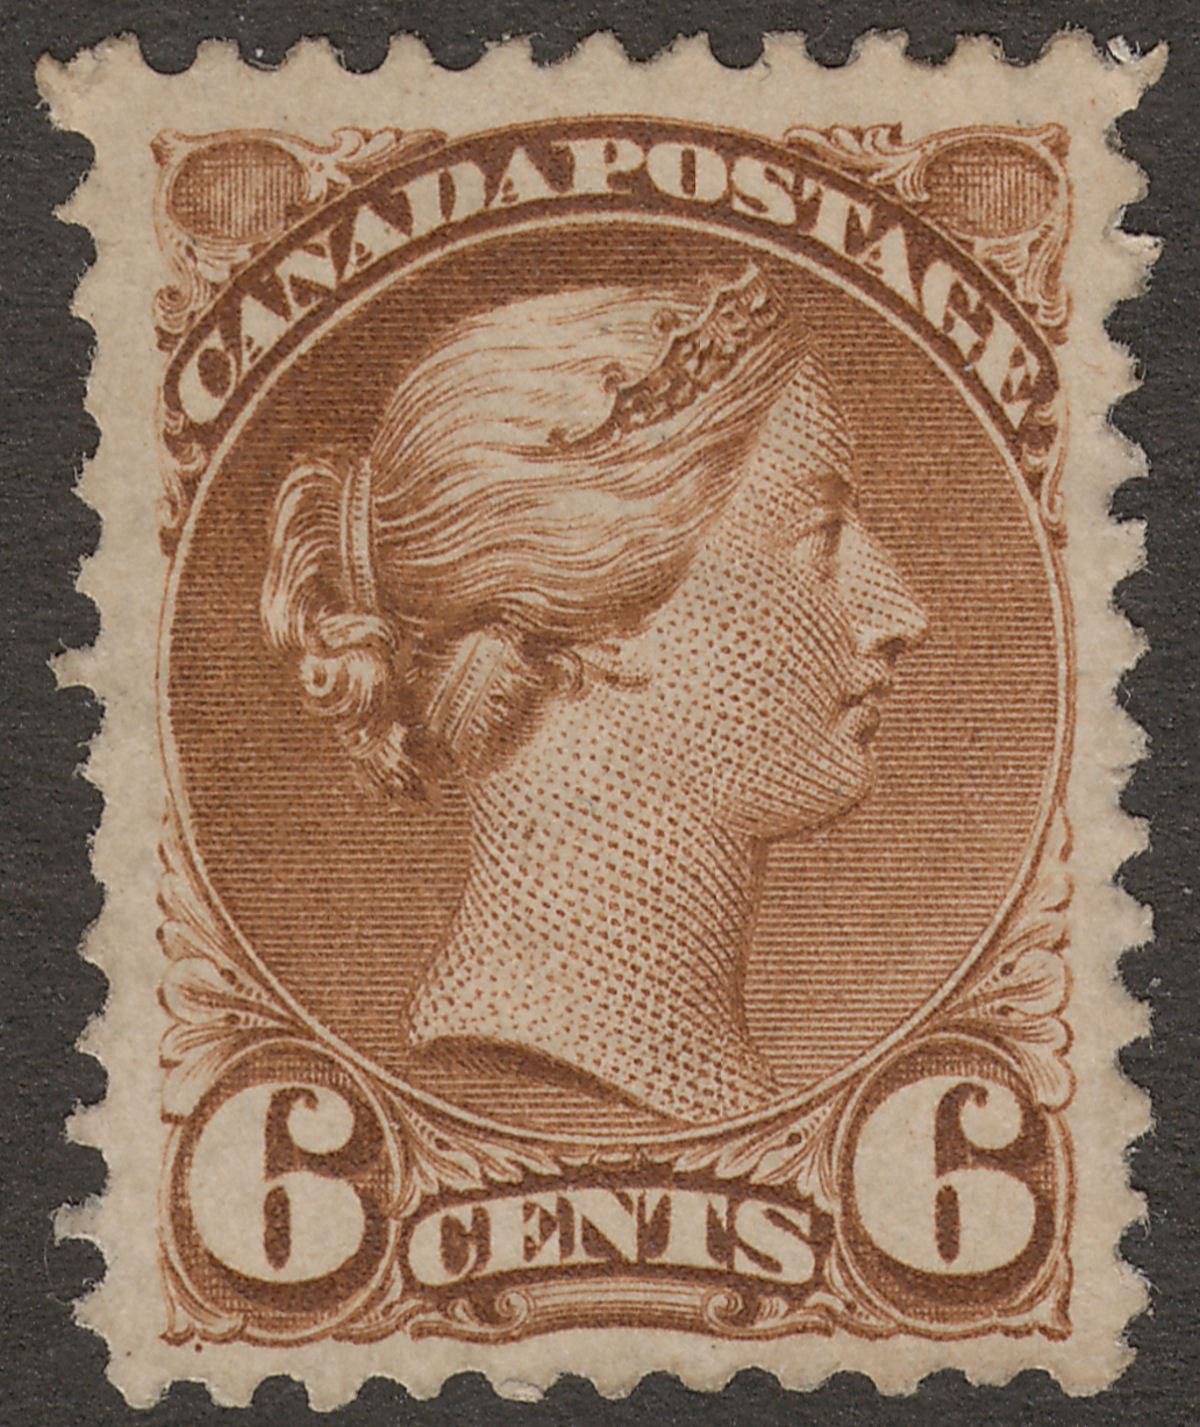 Canada 1873 QV Small Queen 6c Yellowish Brown perf 11½x12 Mint SG98 cat £550